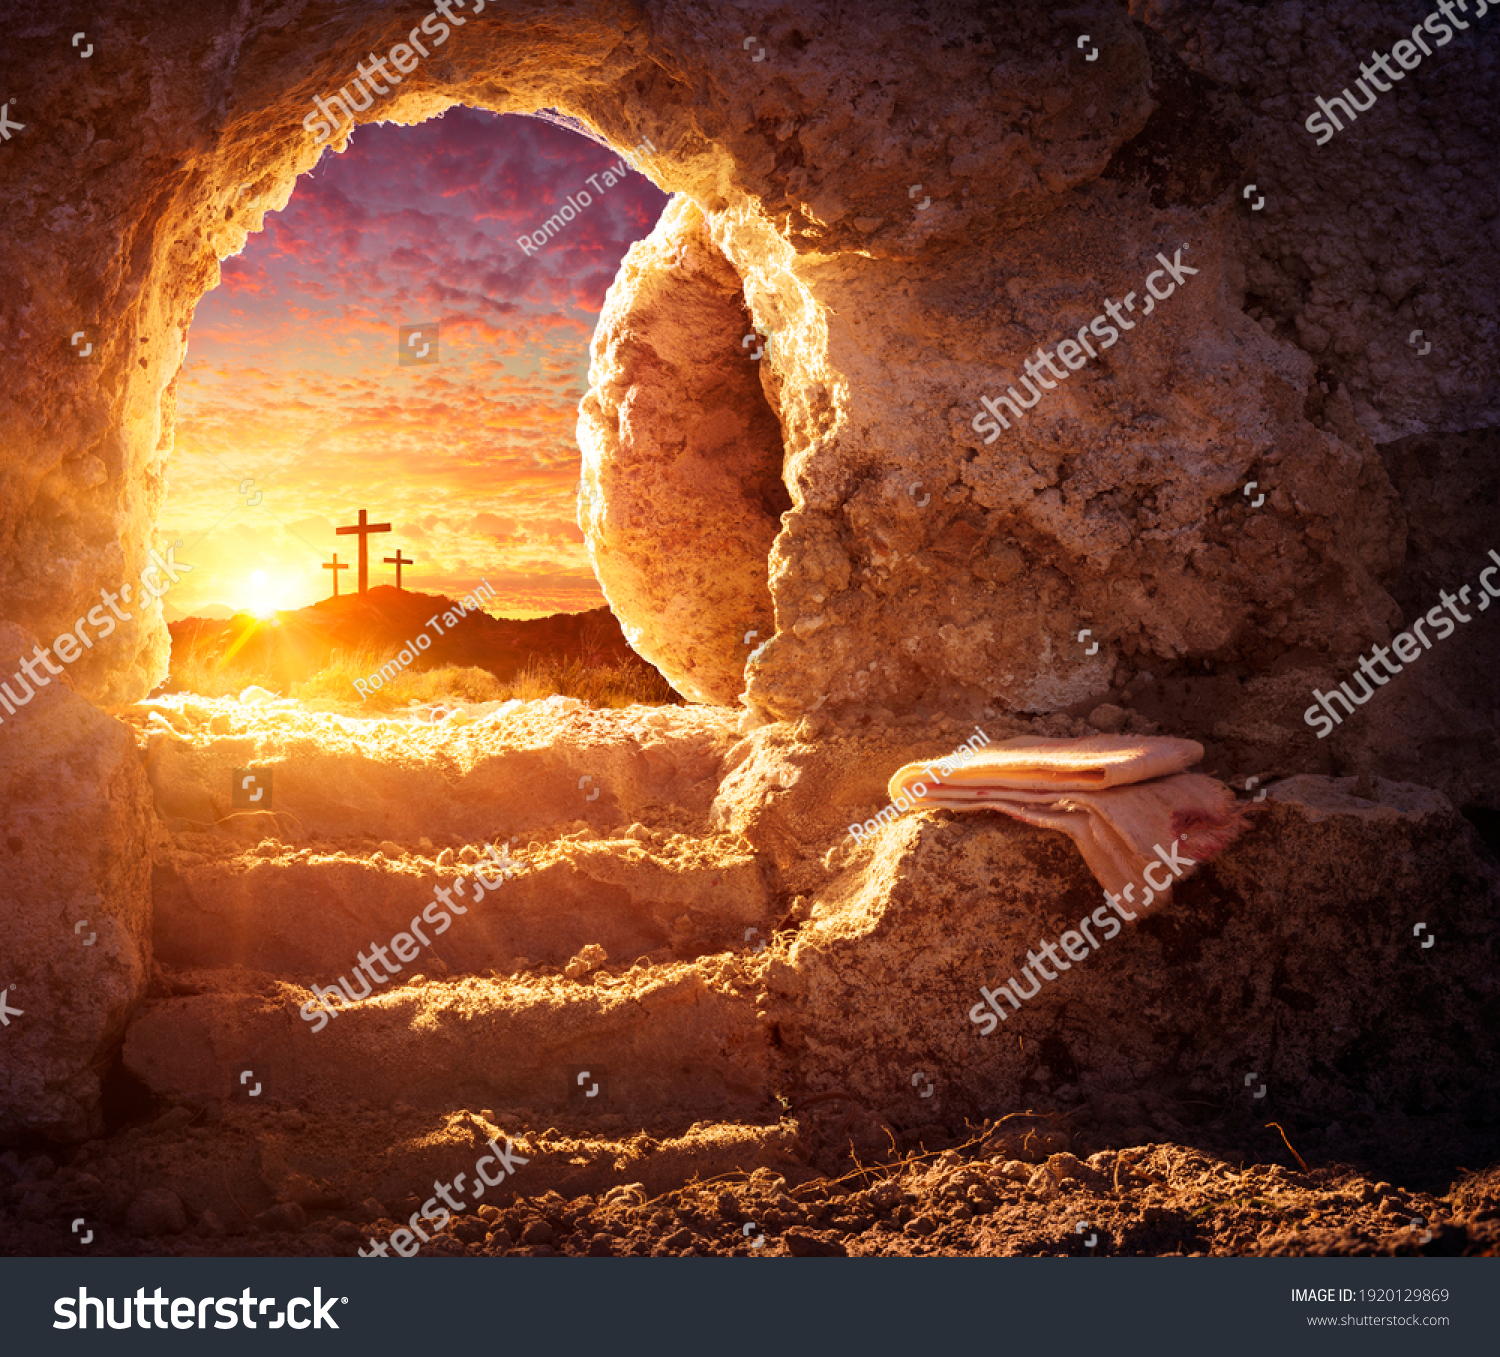 Empty Tomb With Crucifixion At Sunrise - Resurrection Concept #1920129869